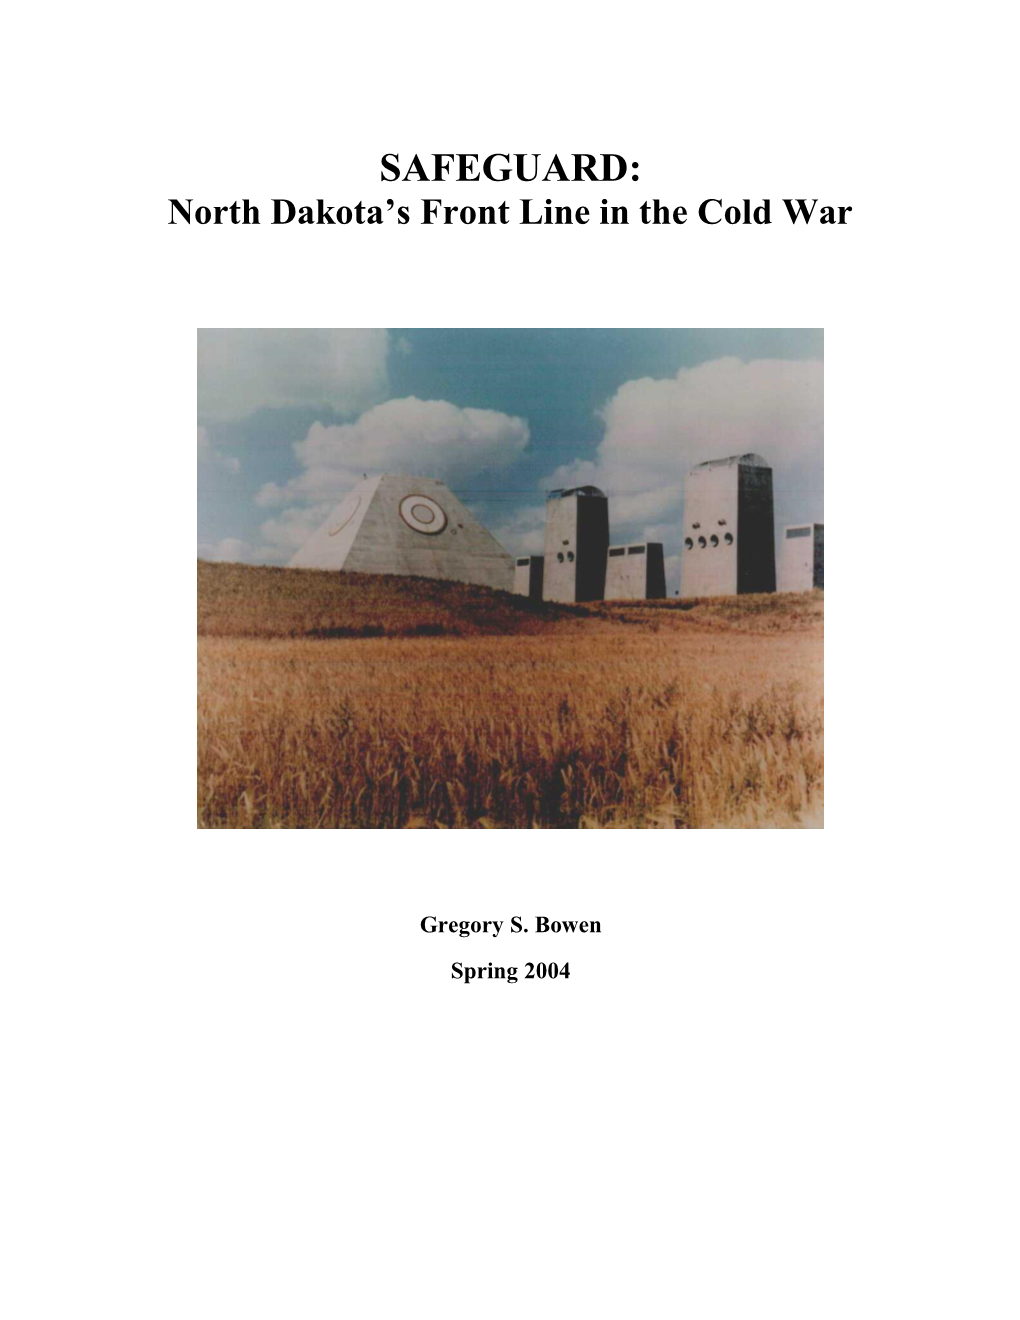 SAFEGUARD: North Dakota’S Front Line in the Cold War